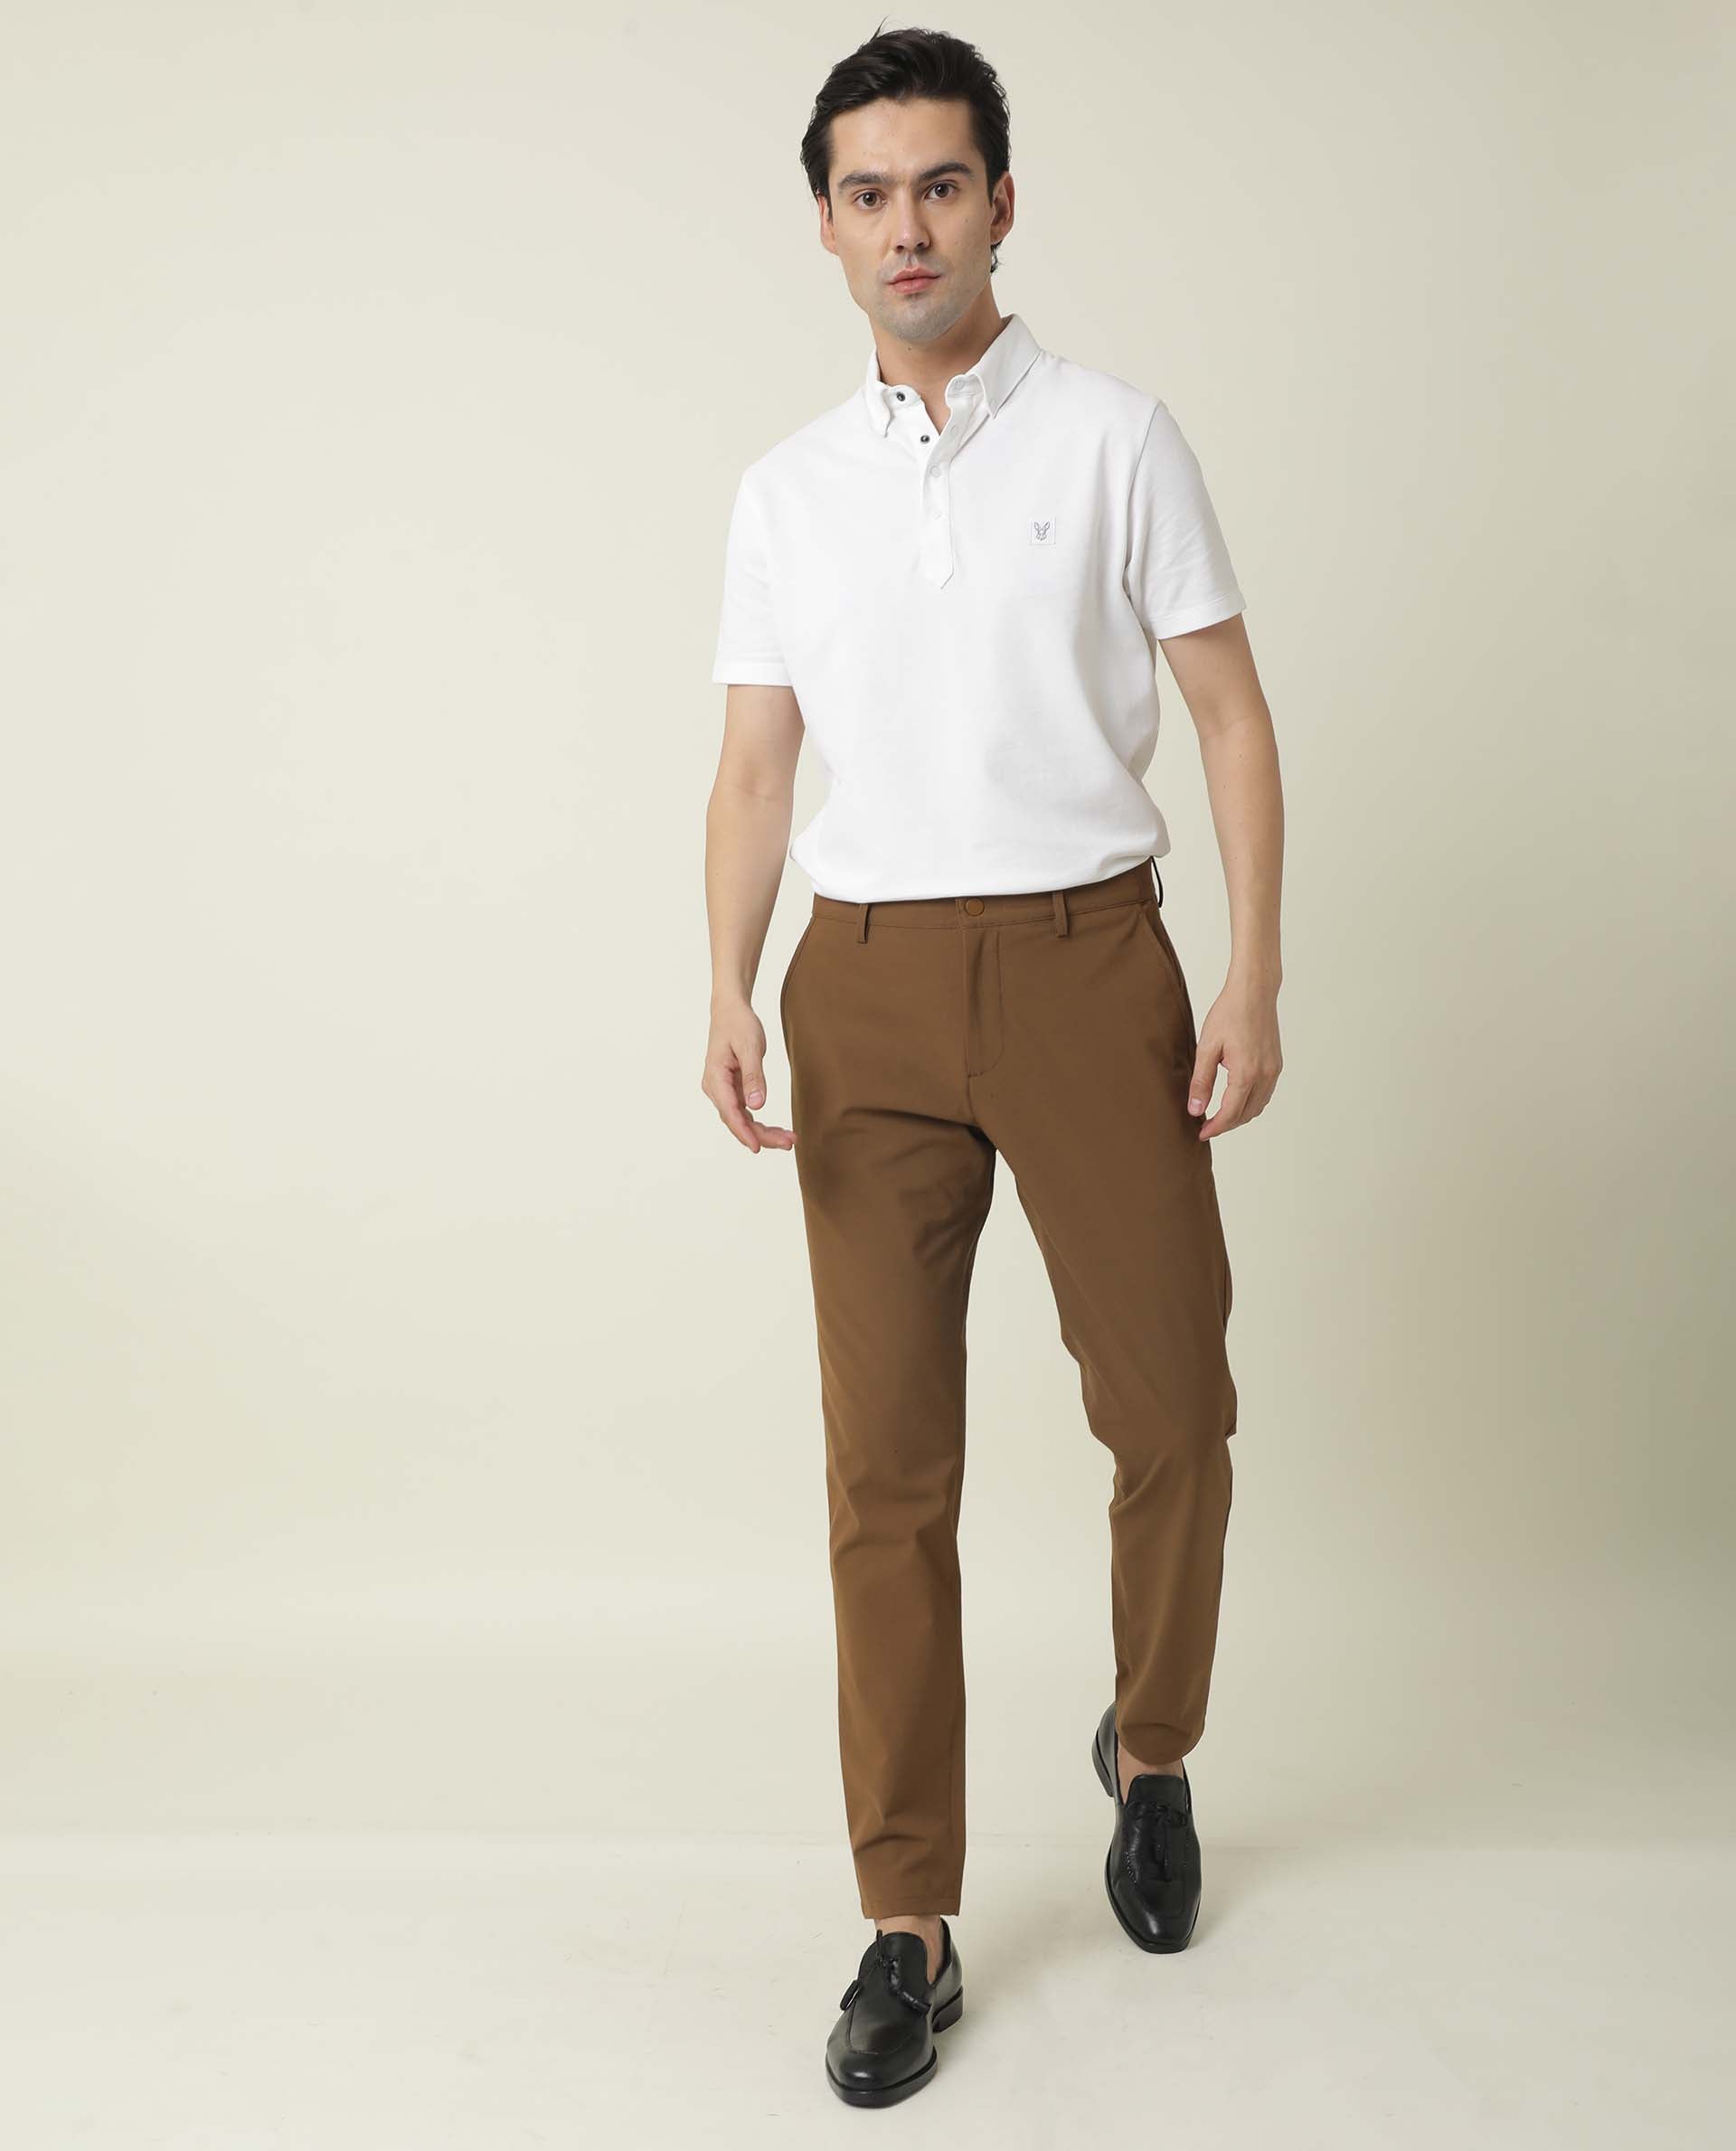 Loose Fit Linen-blend trousers - Rust brown - Men | H&M IN